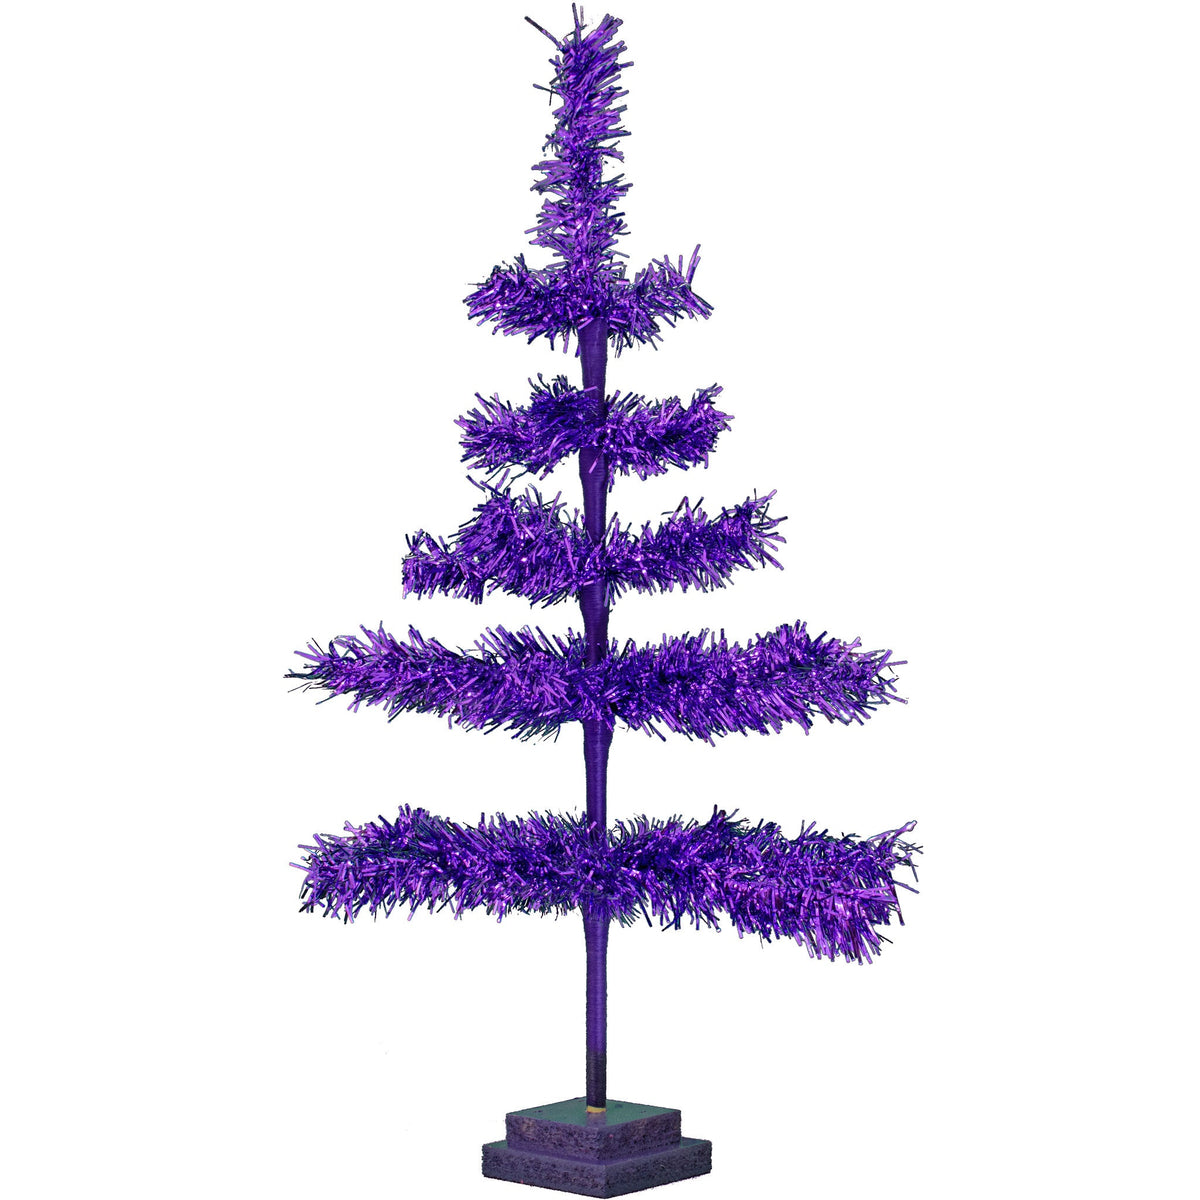 Introducing Lee Display's Limited Edition 28in Tall Vintage Purple Tinsel Christmas Tree – a rare find from our archives, crafted over a decade ago and available in limited quantity.